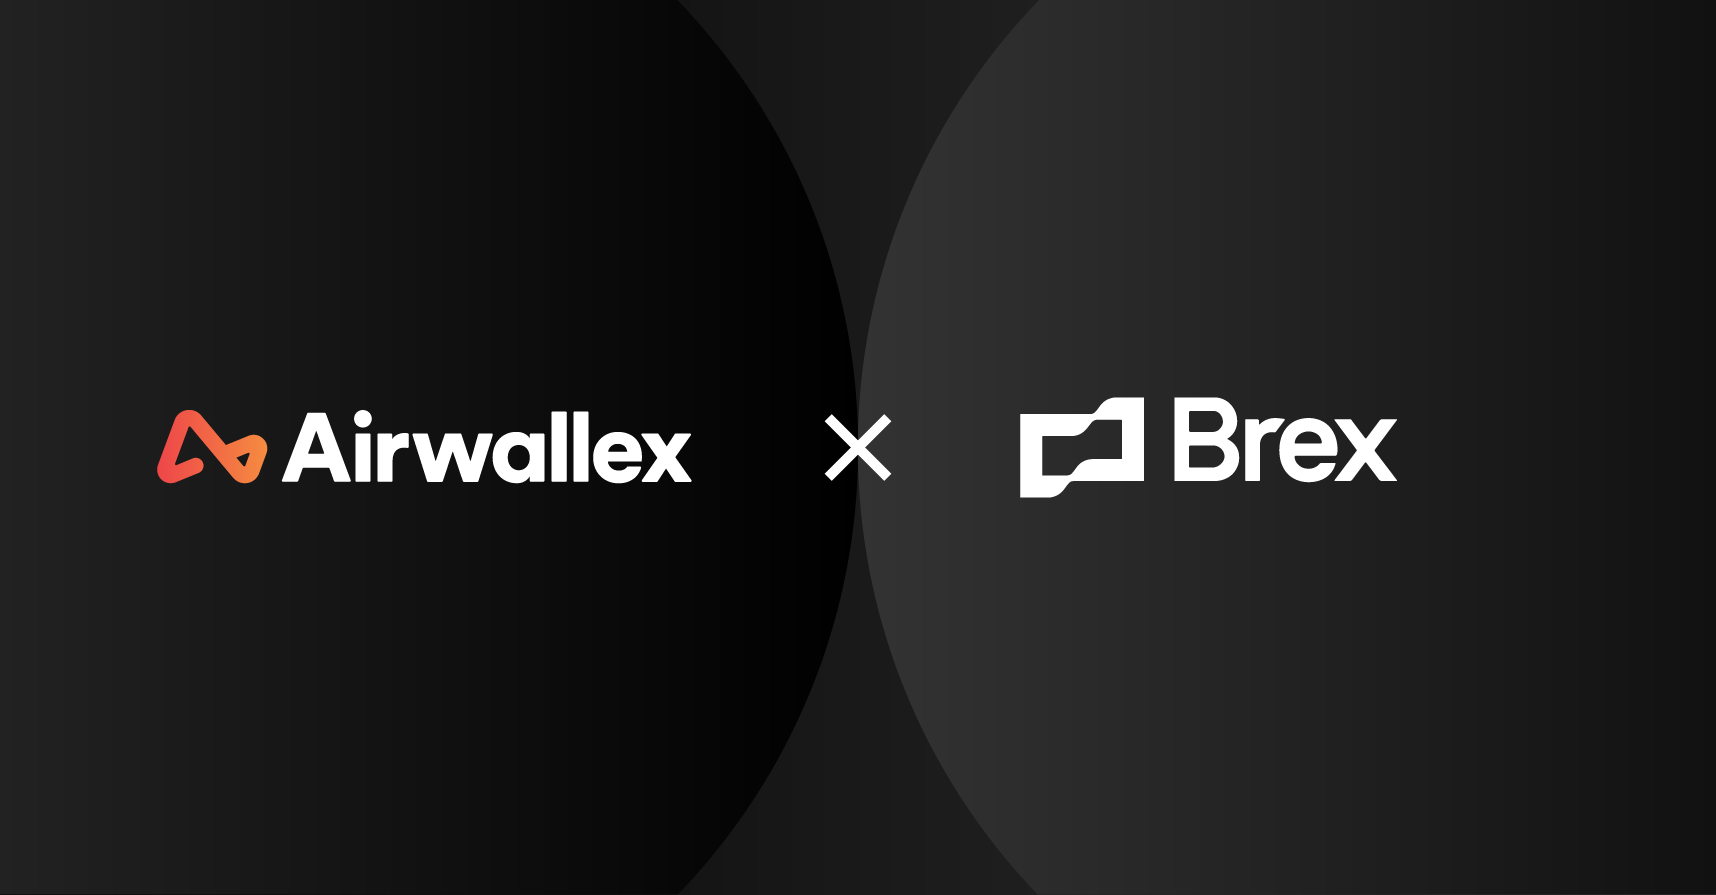 Airwallex scales global money movement, collaborates with Brex to help accelerate international expansion